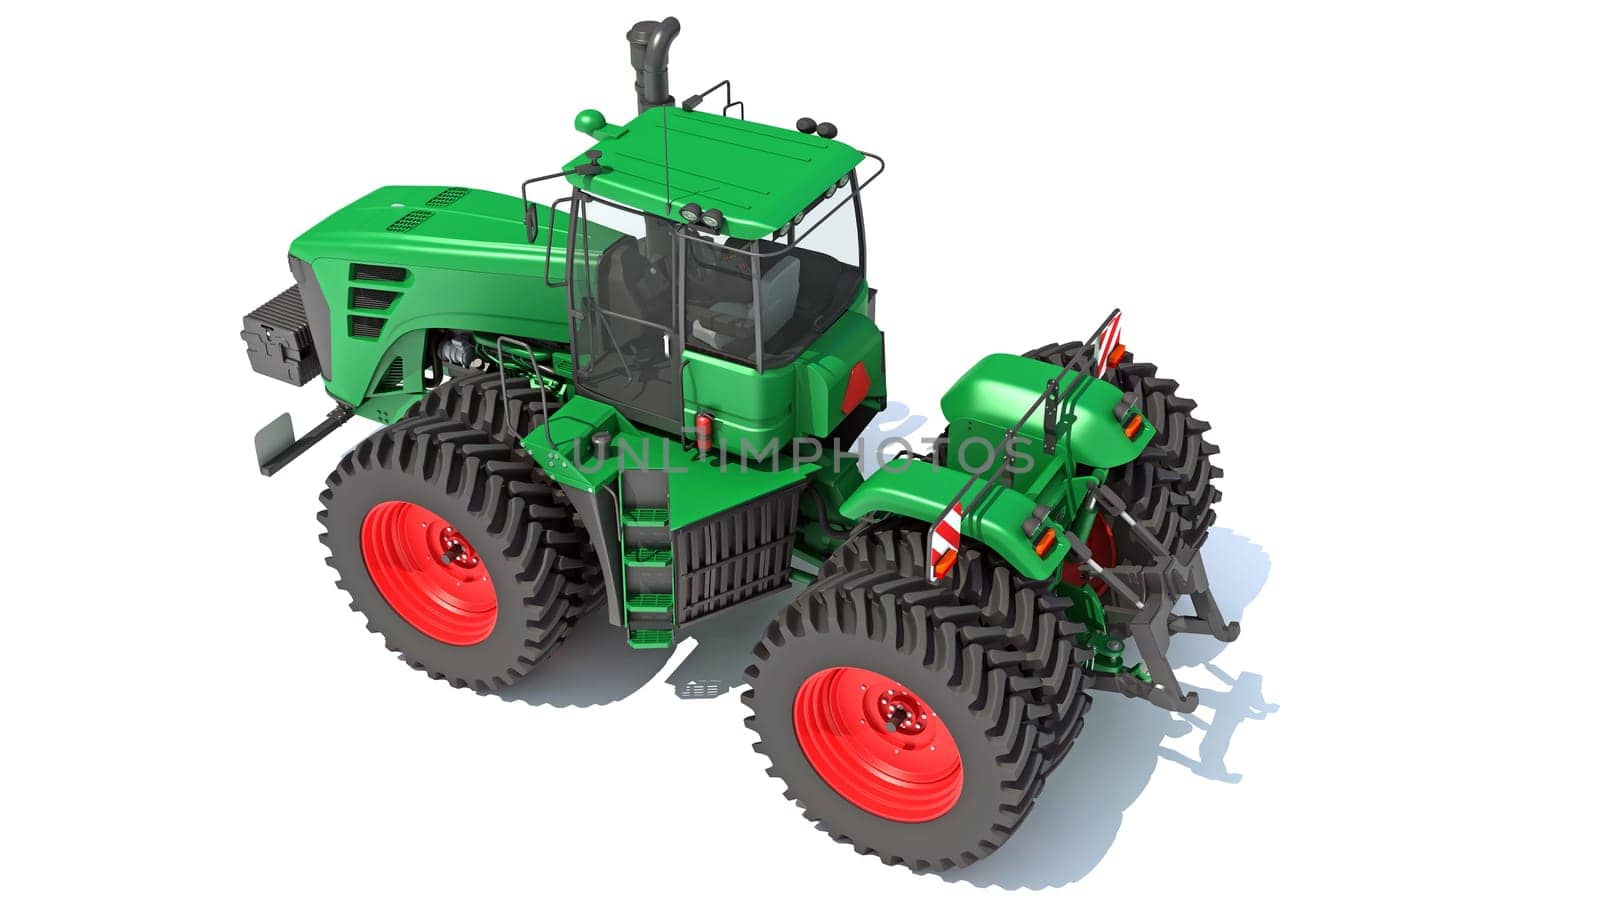 Wheeled Articulated Farm Tractor 3D rendering model on white background